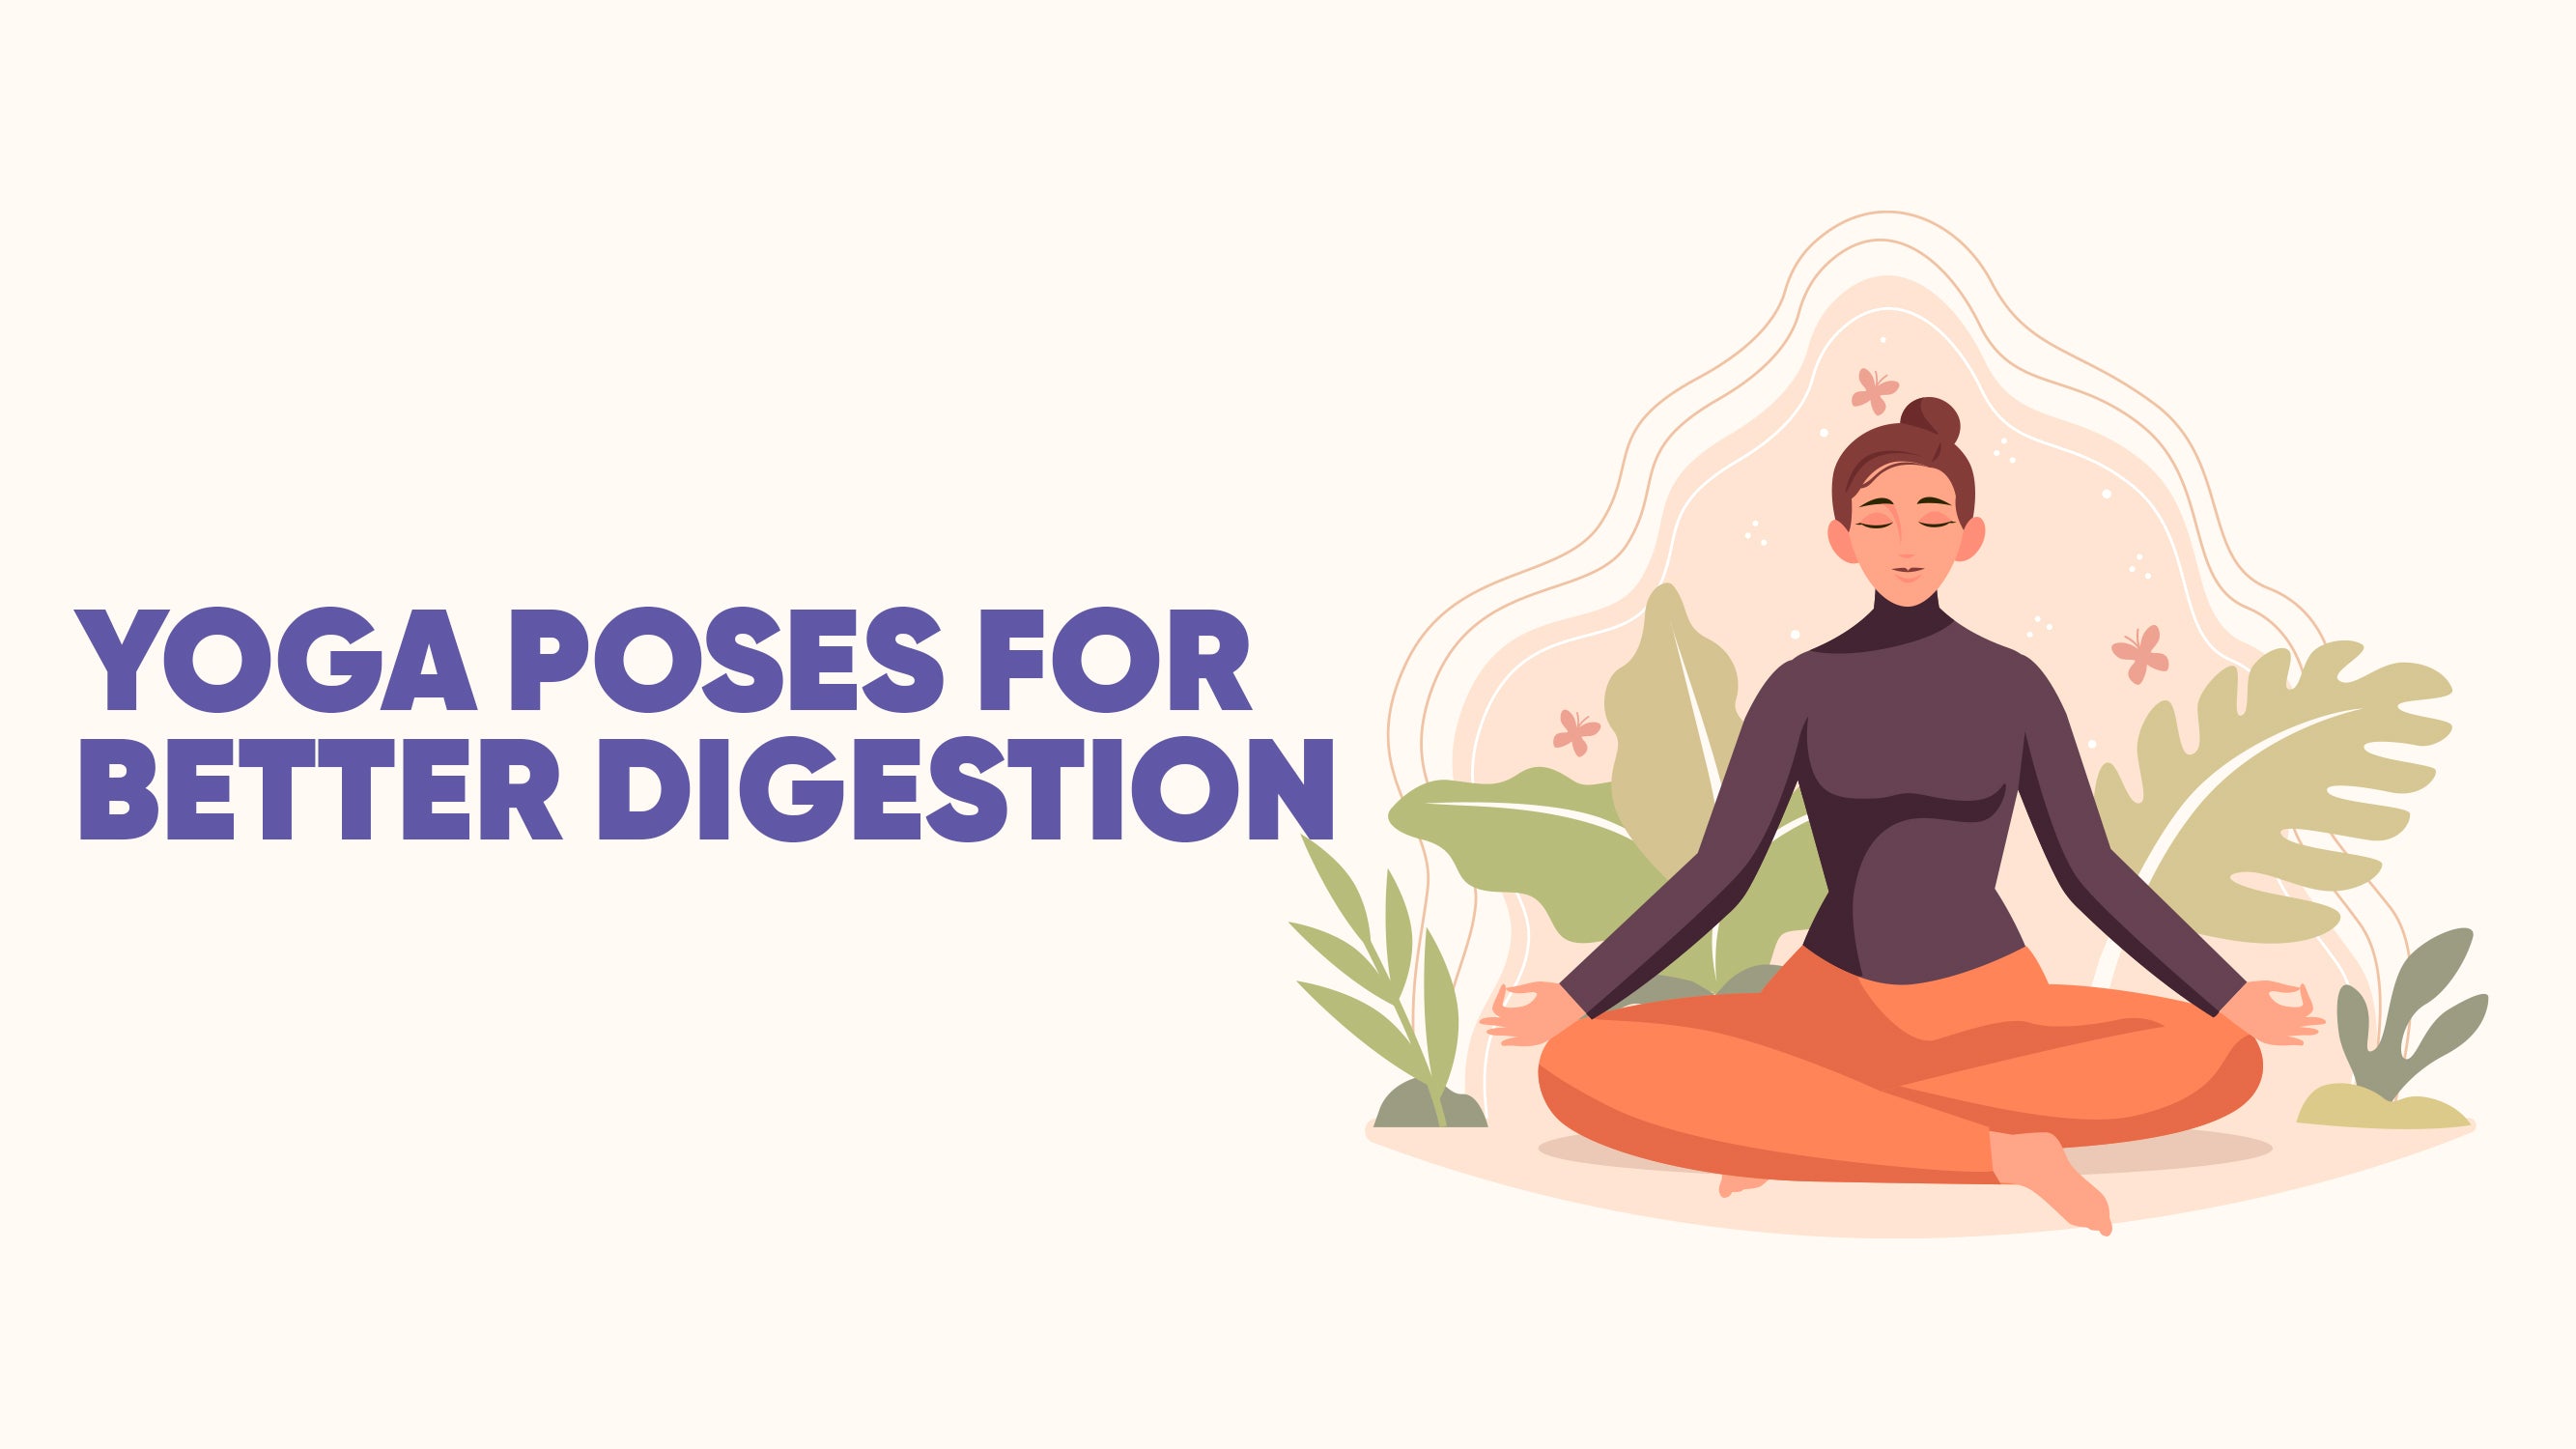 7 yoga poses to improve gut and digestive health